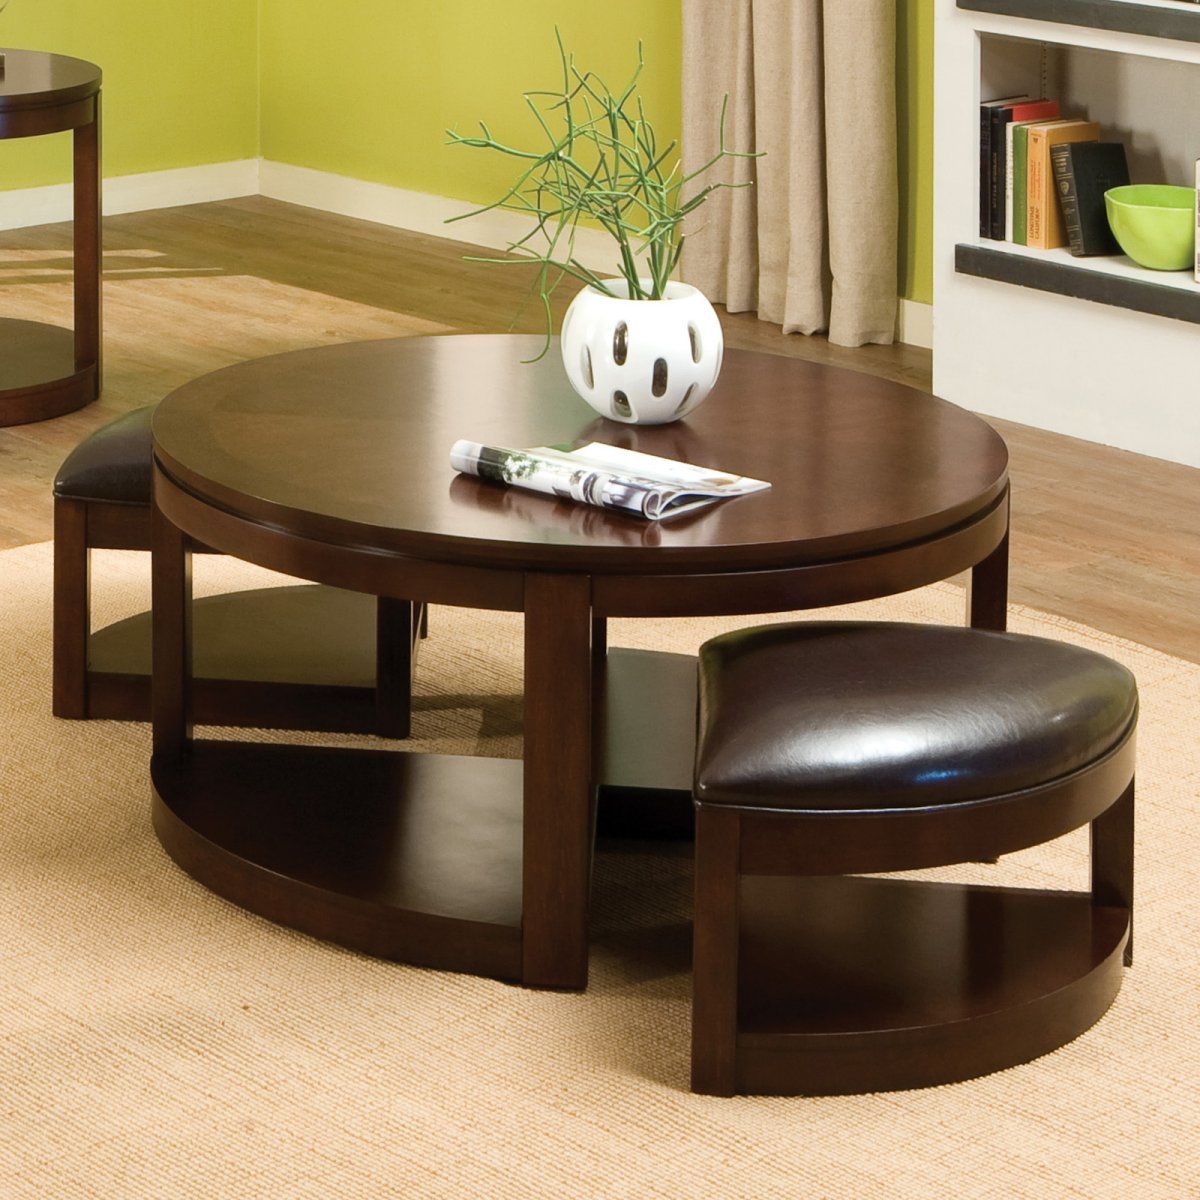 The Round Coffee Tables With Storage – The Simple And Throughout Espresso Wood Storage Coffee Tables (View 6 of 15)